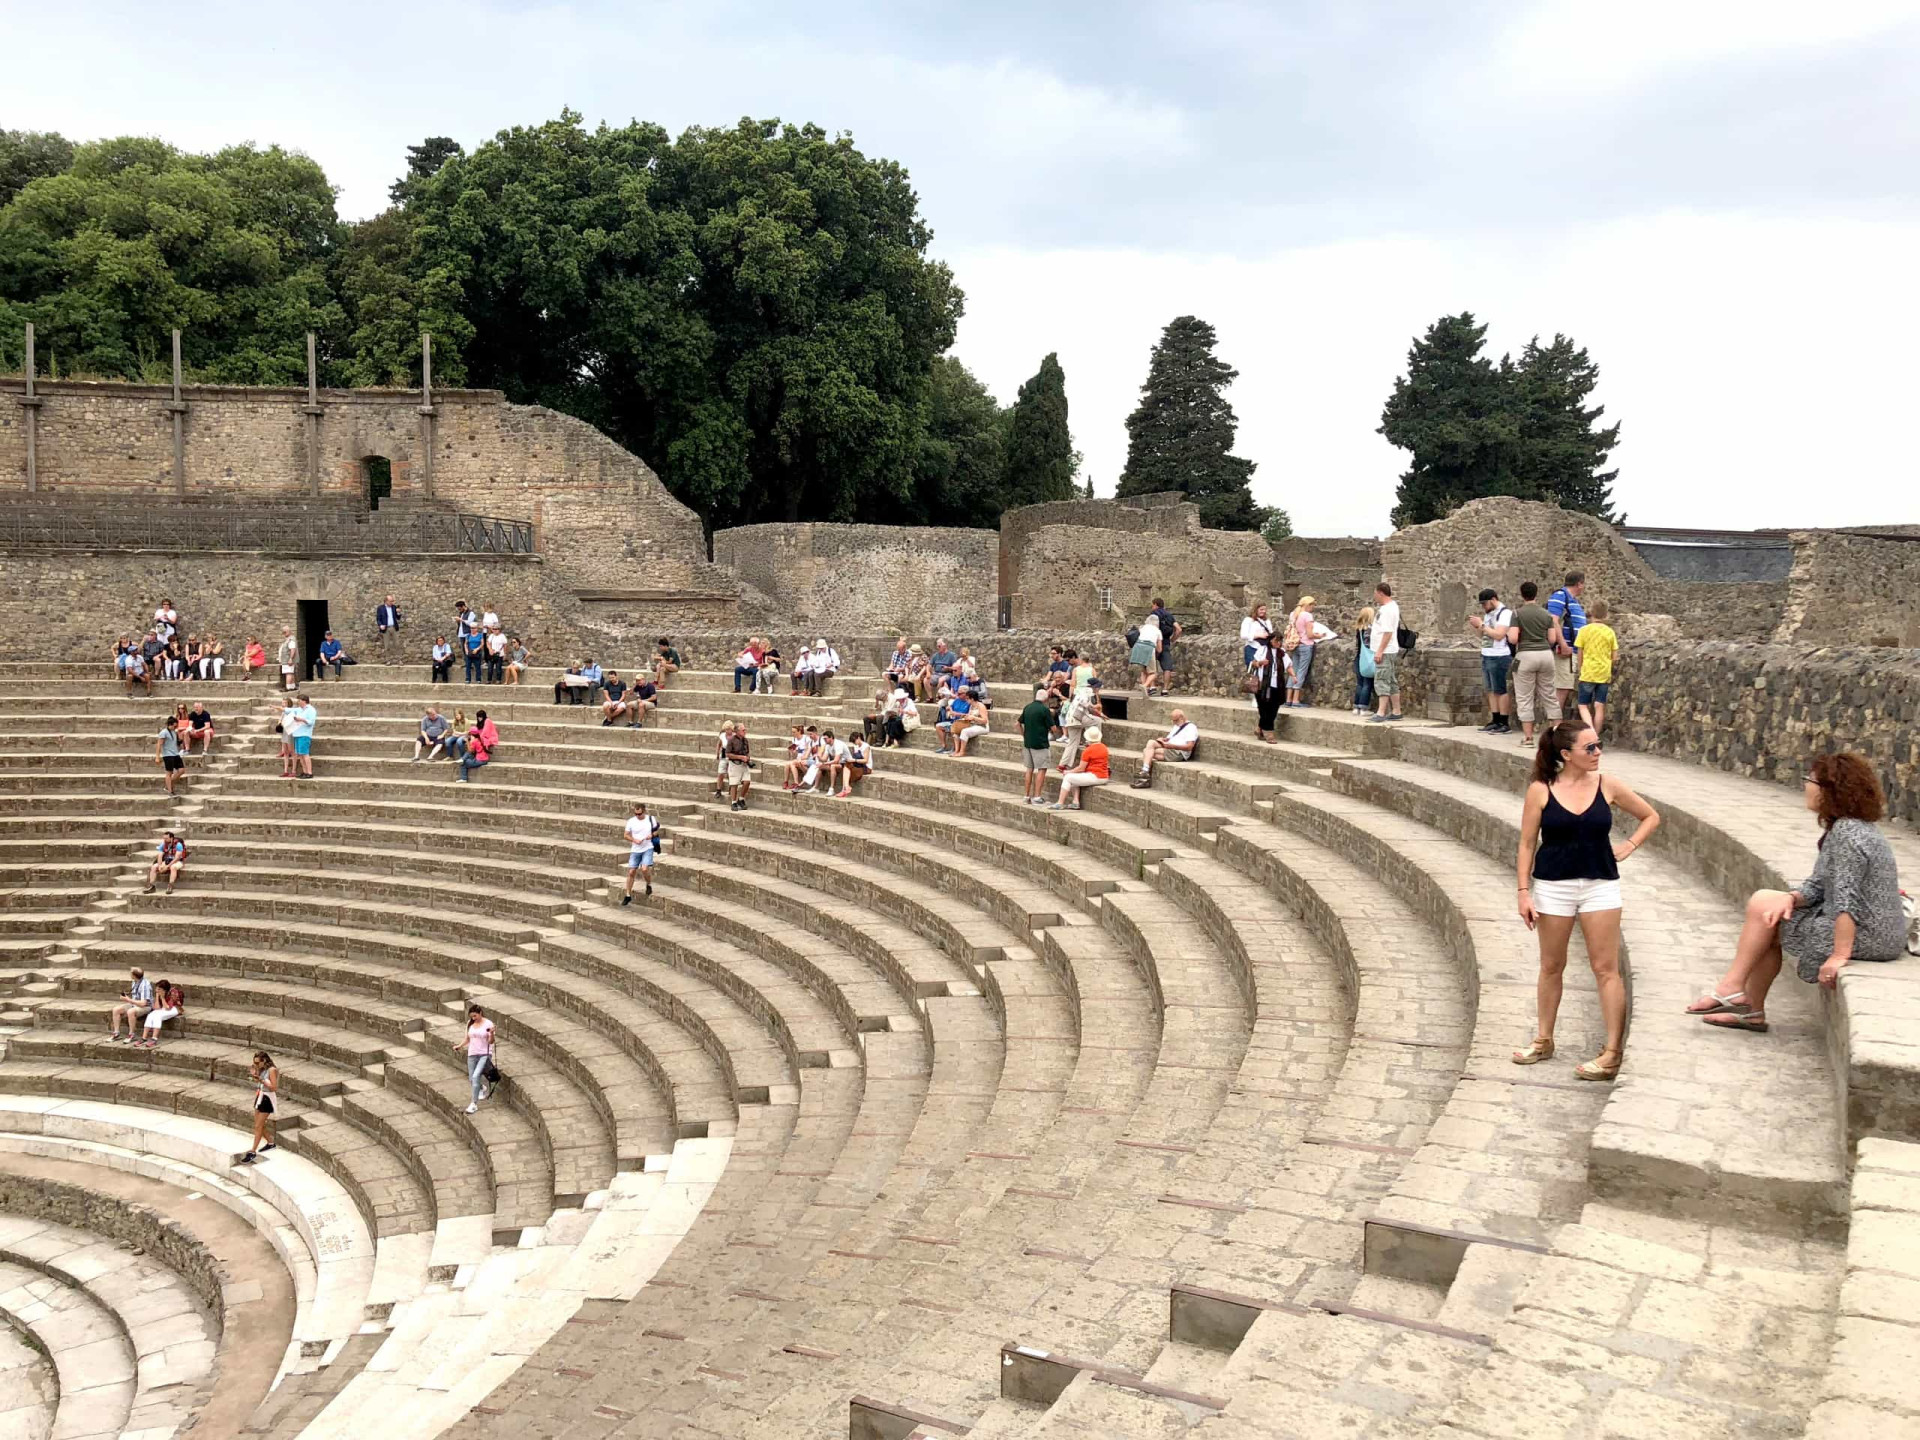 Don't forget to visit the oldest surviving Roman amphitheater, situated right in Pompeii.<p><a href="https://www.msn.com/en-us/community/channel/vid-7xx8mnucu55yw63we9va2gwr7uihbxwc68fxqp25x6tg4ftibpra?cvid=94631541bc0f4f89bfd59158d696ad7e">Follow us and access great exclusive content every day</a></p>